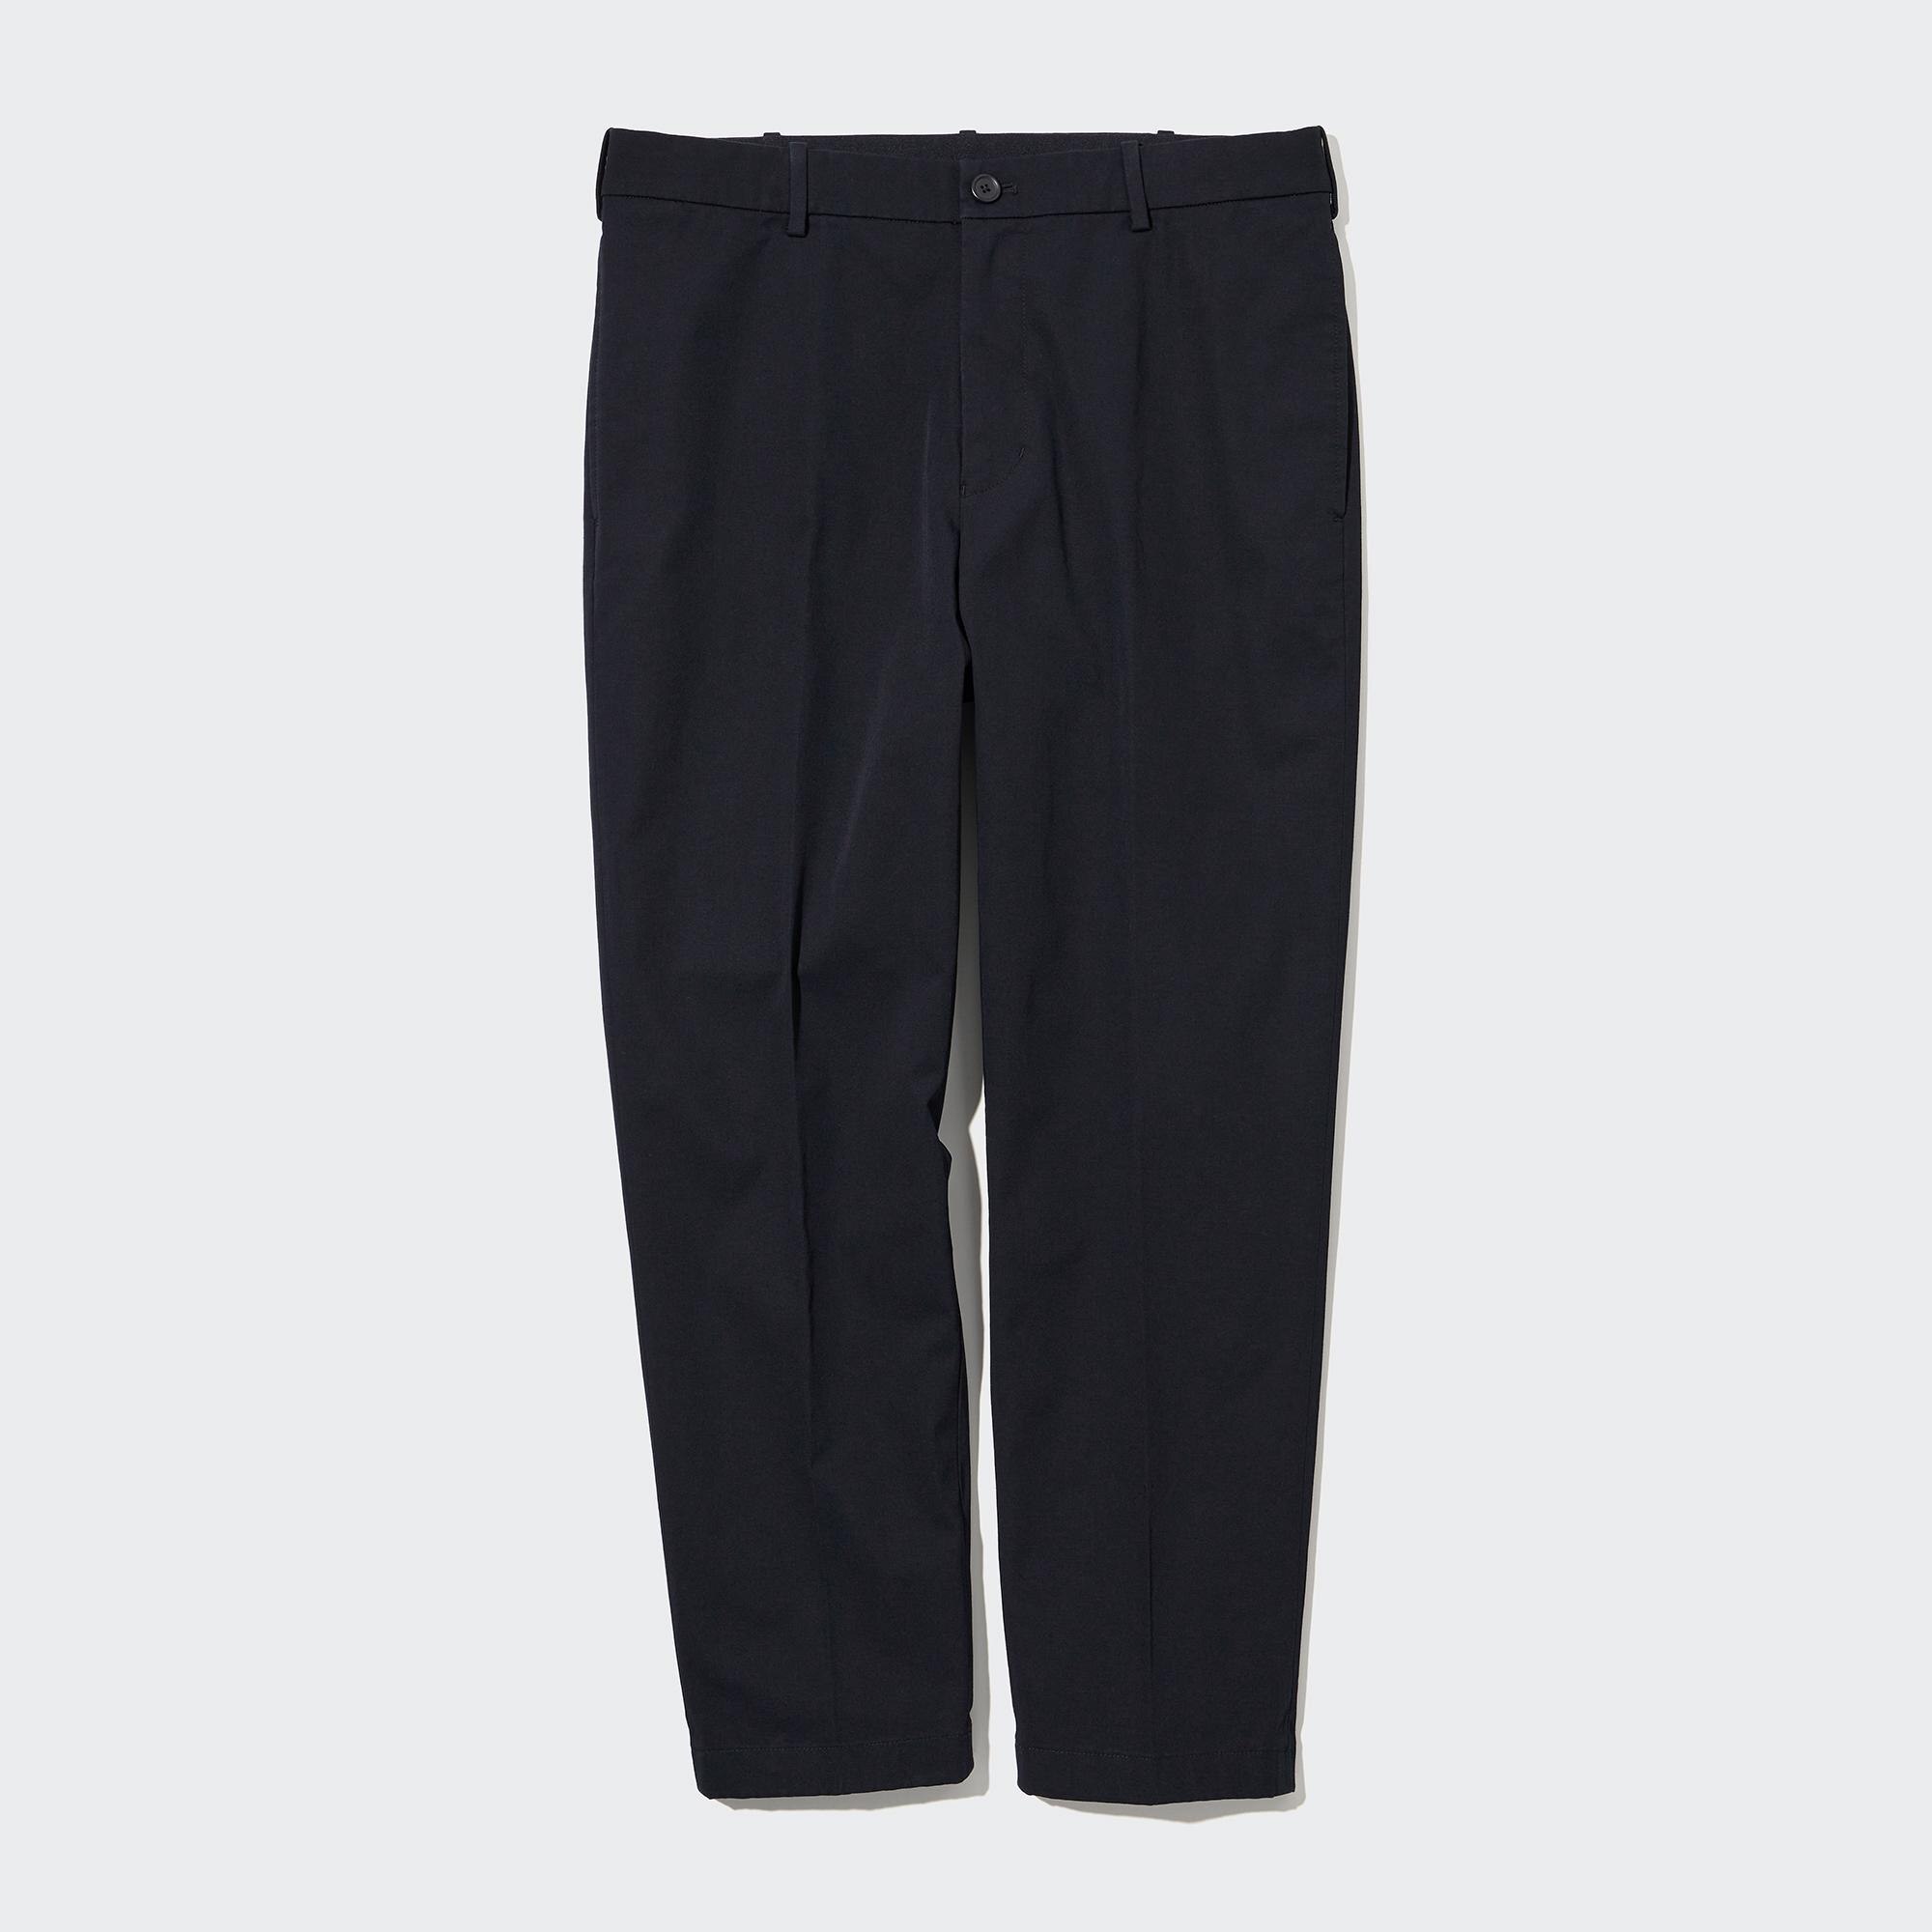 Smart Striped Ankle Length Trousers | UNIQLO GB